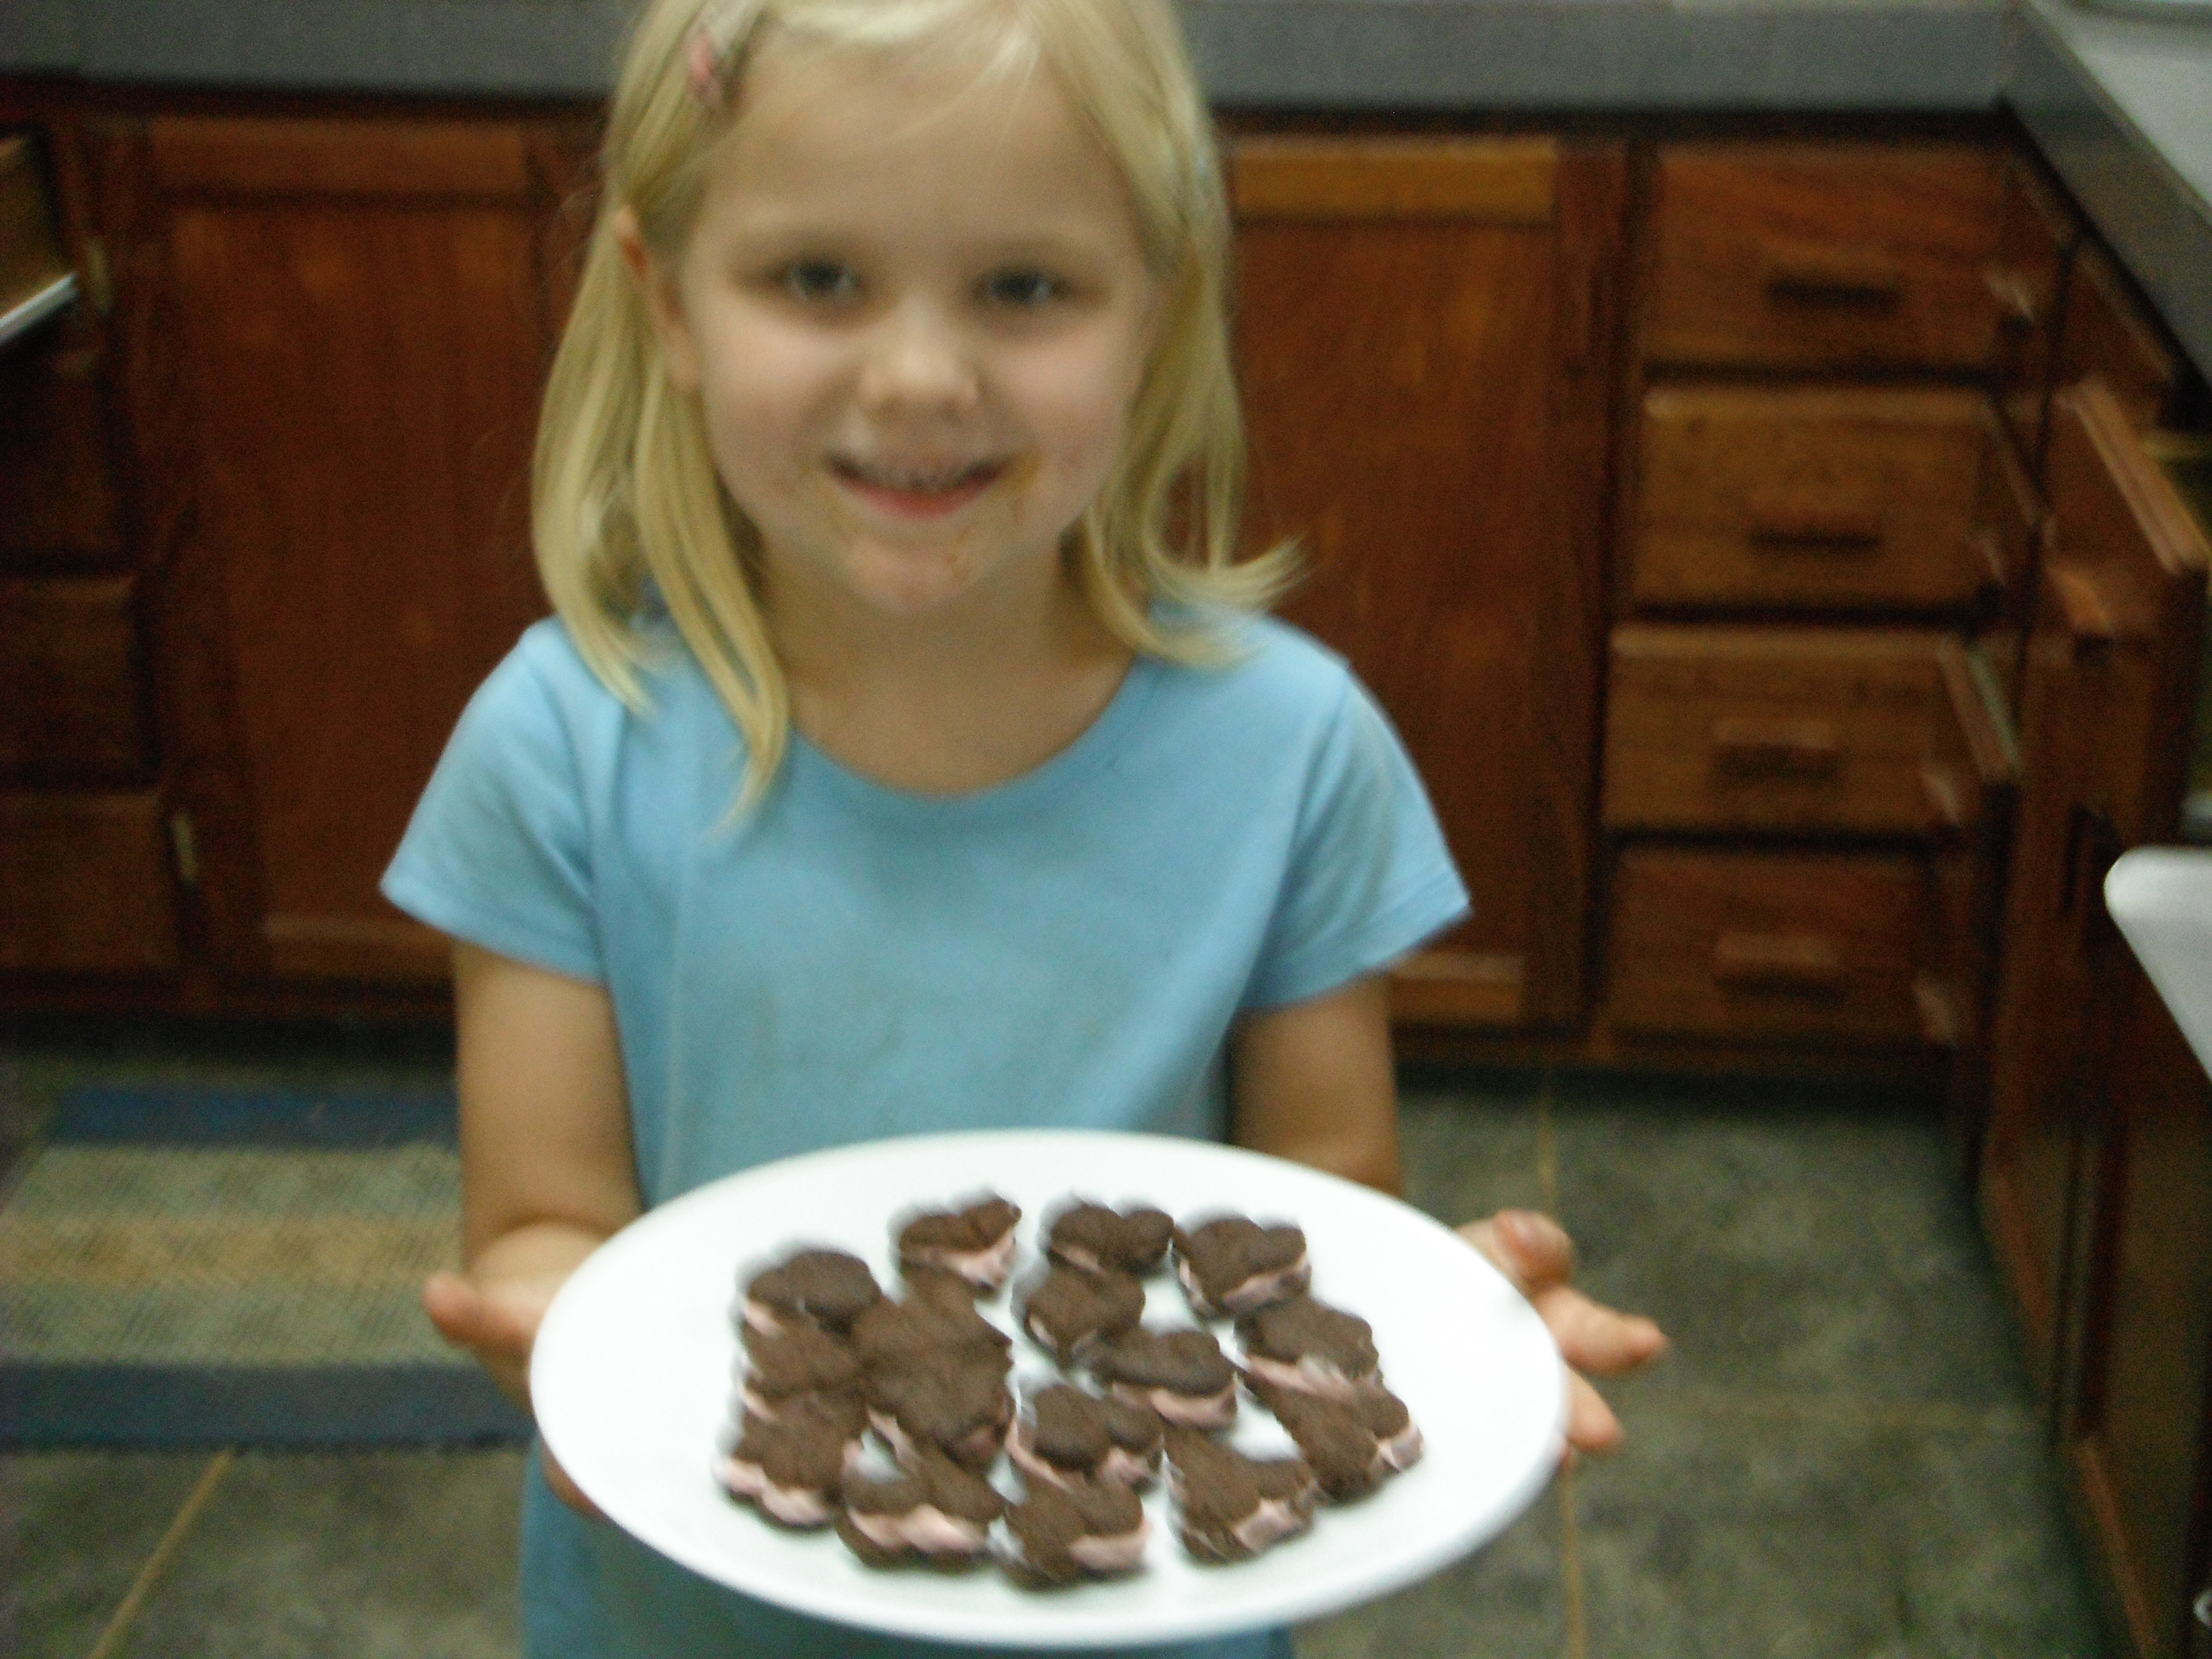 Valentines Day celebrated by baking heart shaped cookies with Ruth.